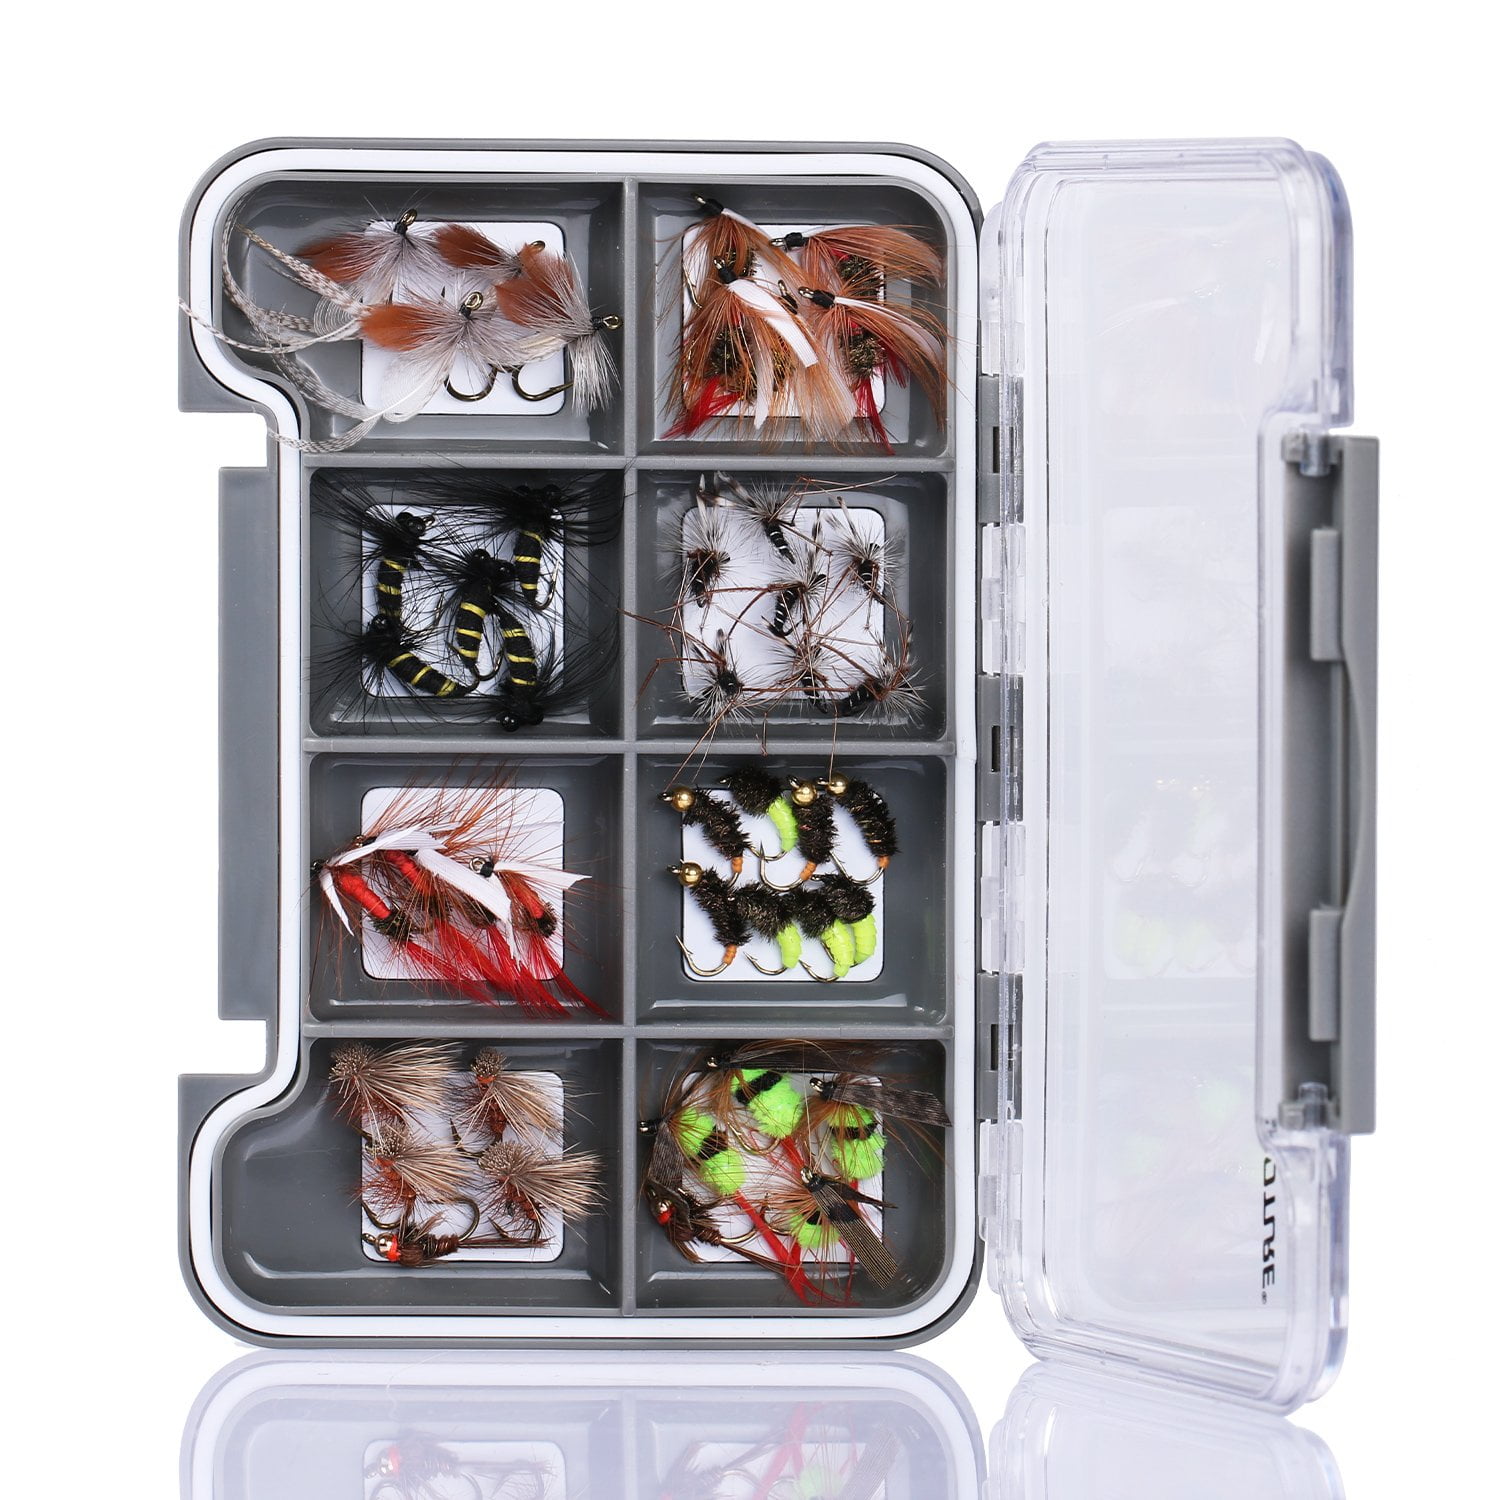 Goture Small Tackle Box,Waterproof Fishing Lure Boxes, 2 sided